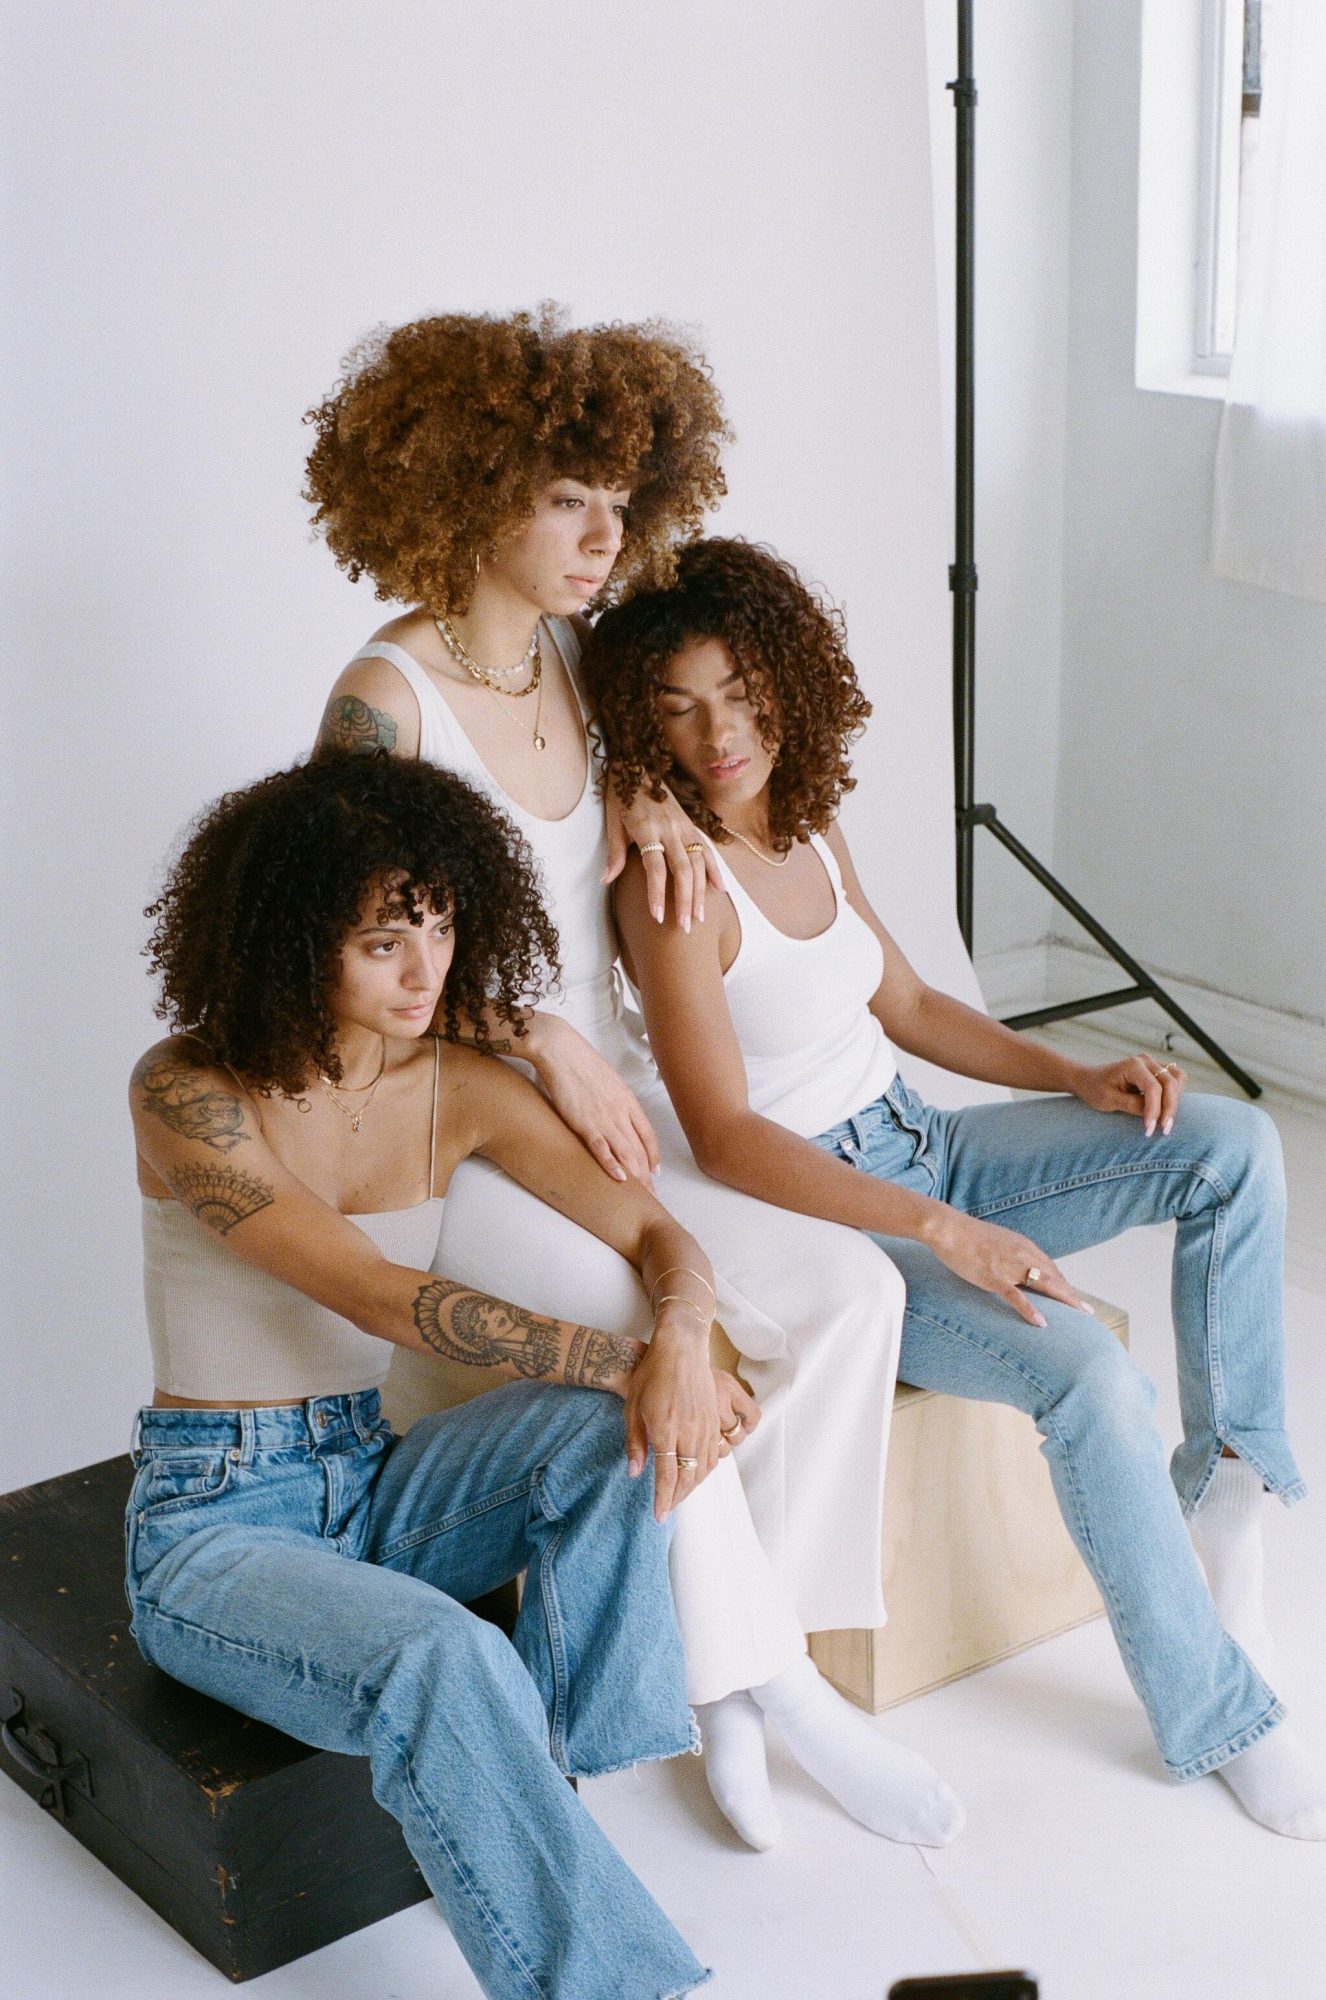 Three models with full, natural, frizzy curly hair in white tank tops and jeans leaning against each other against a white photo backdrop.